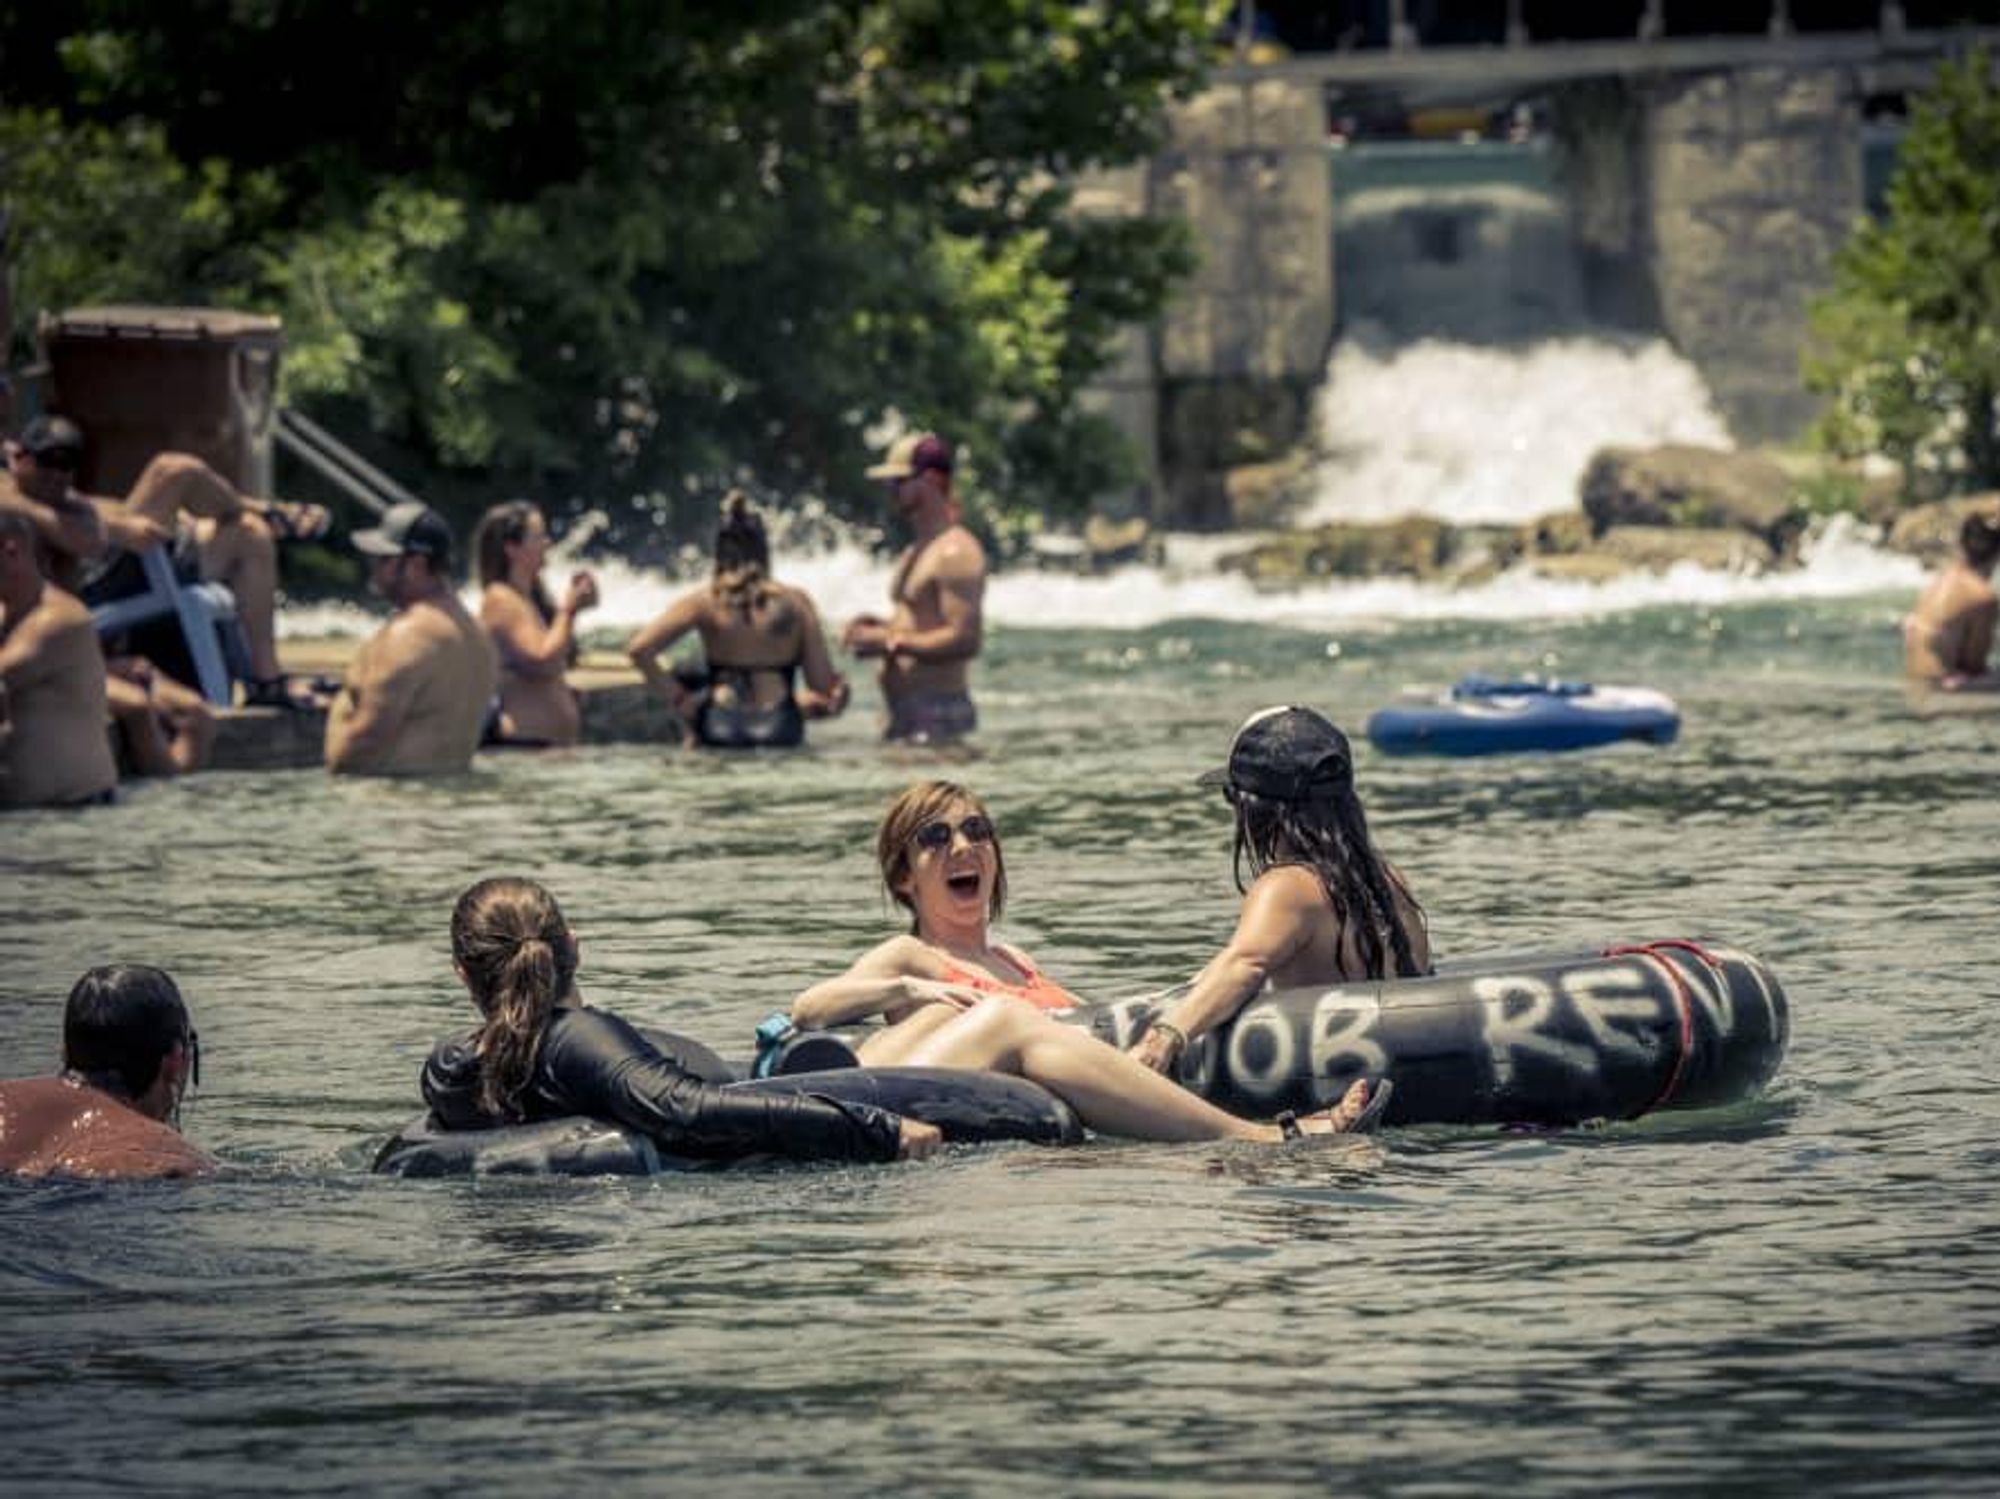 Make a splash in New Braunfels with water parks, river floats, and more -  CultureMap San Antonio